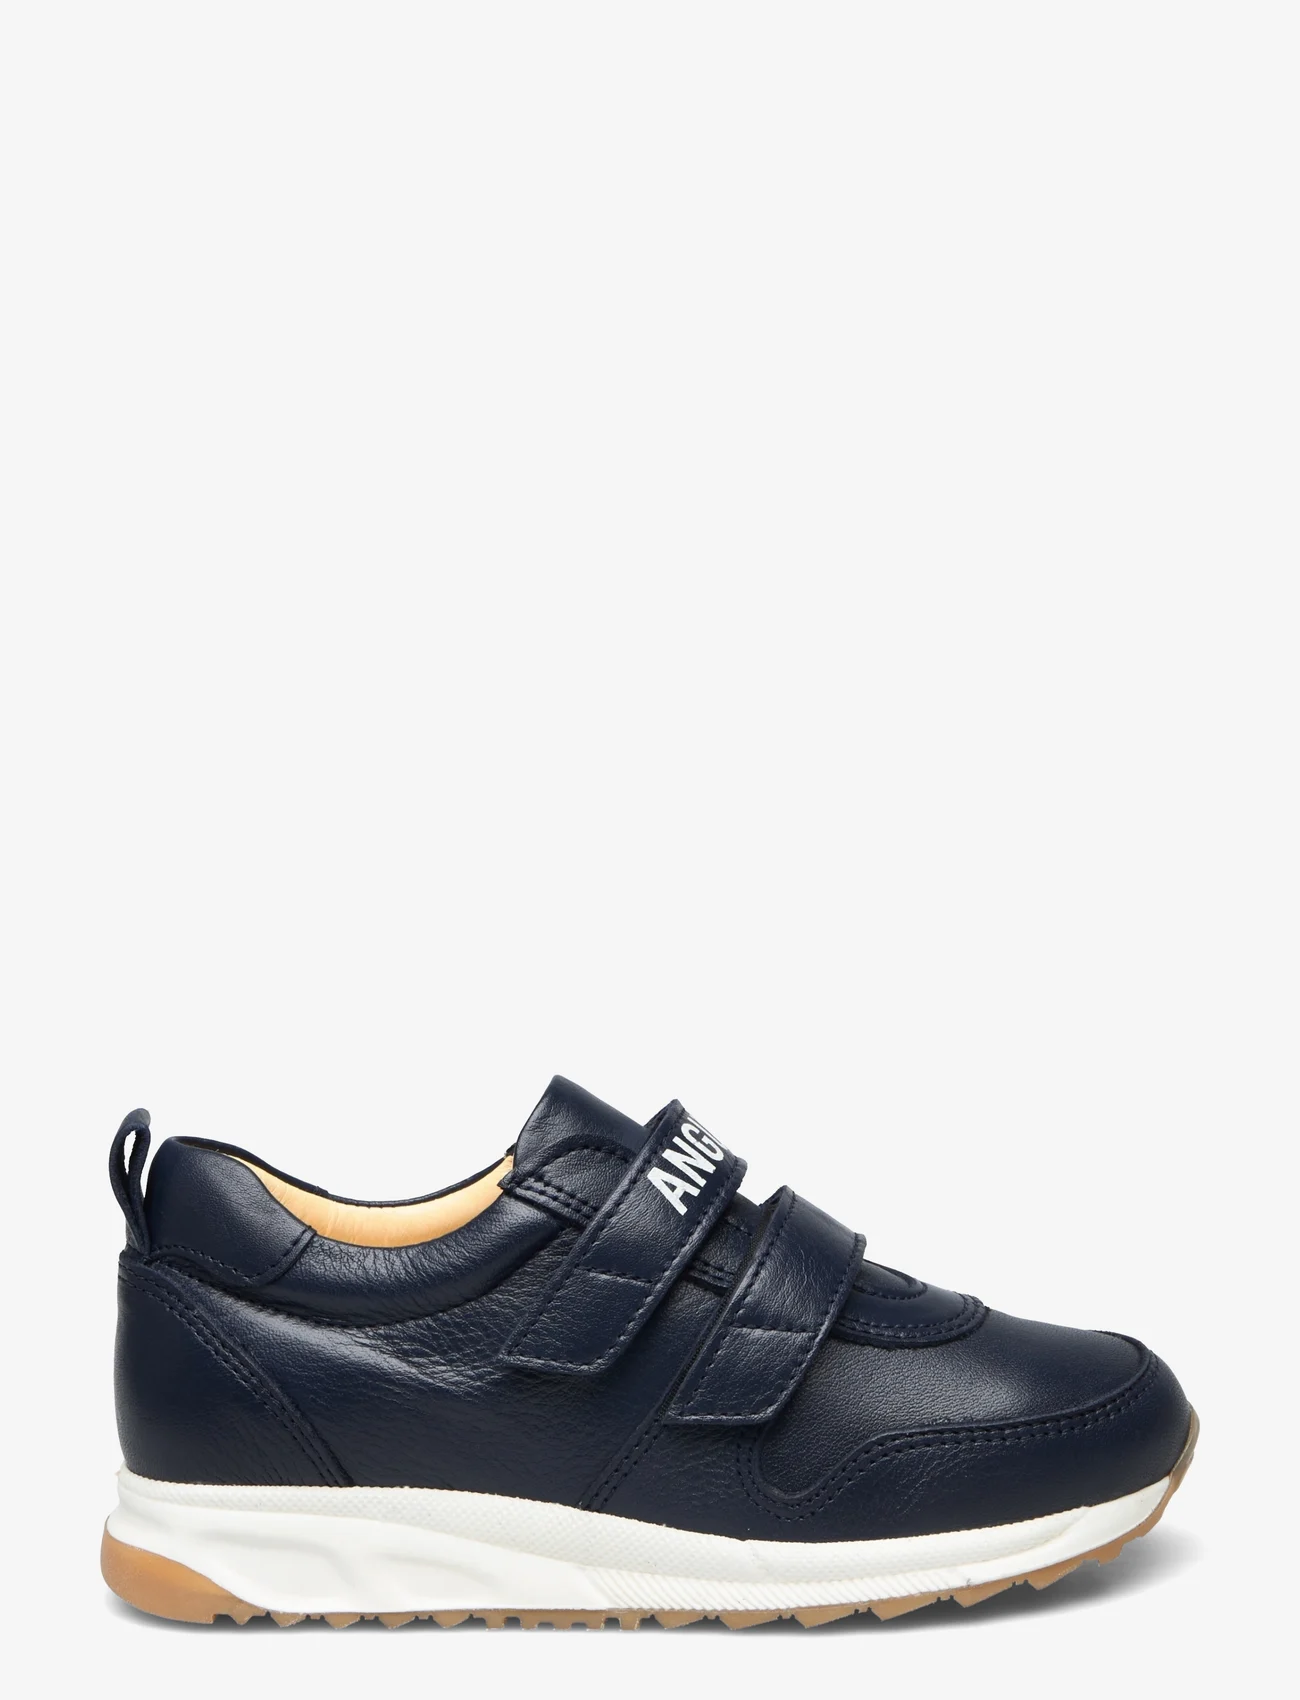 ANGULUS - Shoes - flat - with velcro - sommerschnäppchen - 2585 navy - 1